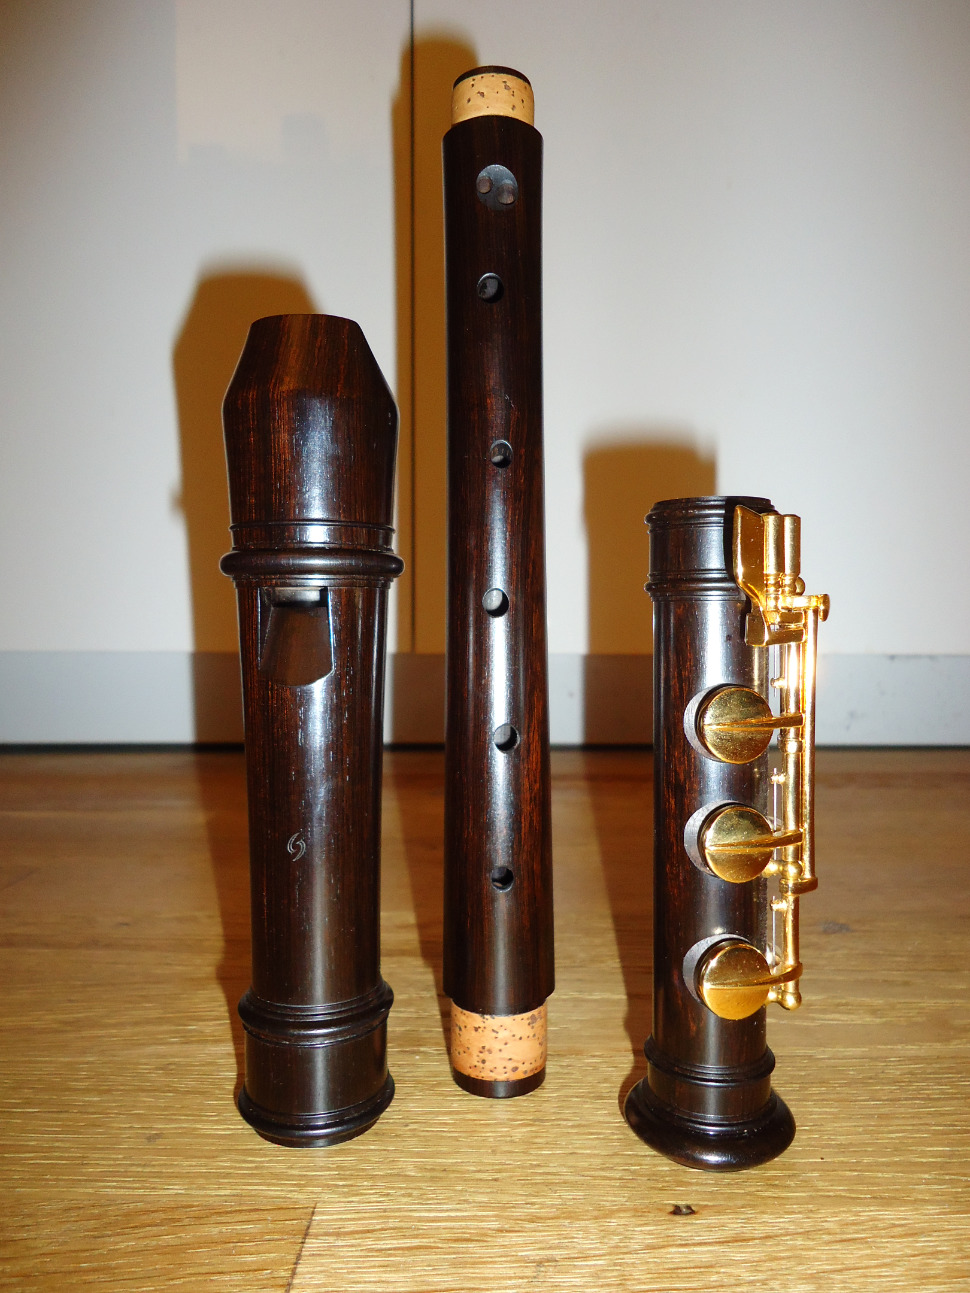 Modern Alto recorder with e-foot made by Mollenhauer \u2014 Recorders for Sale